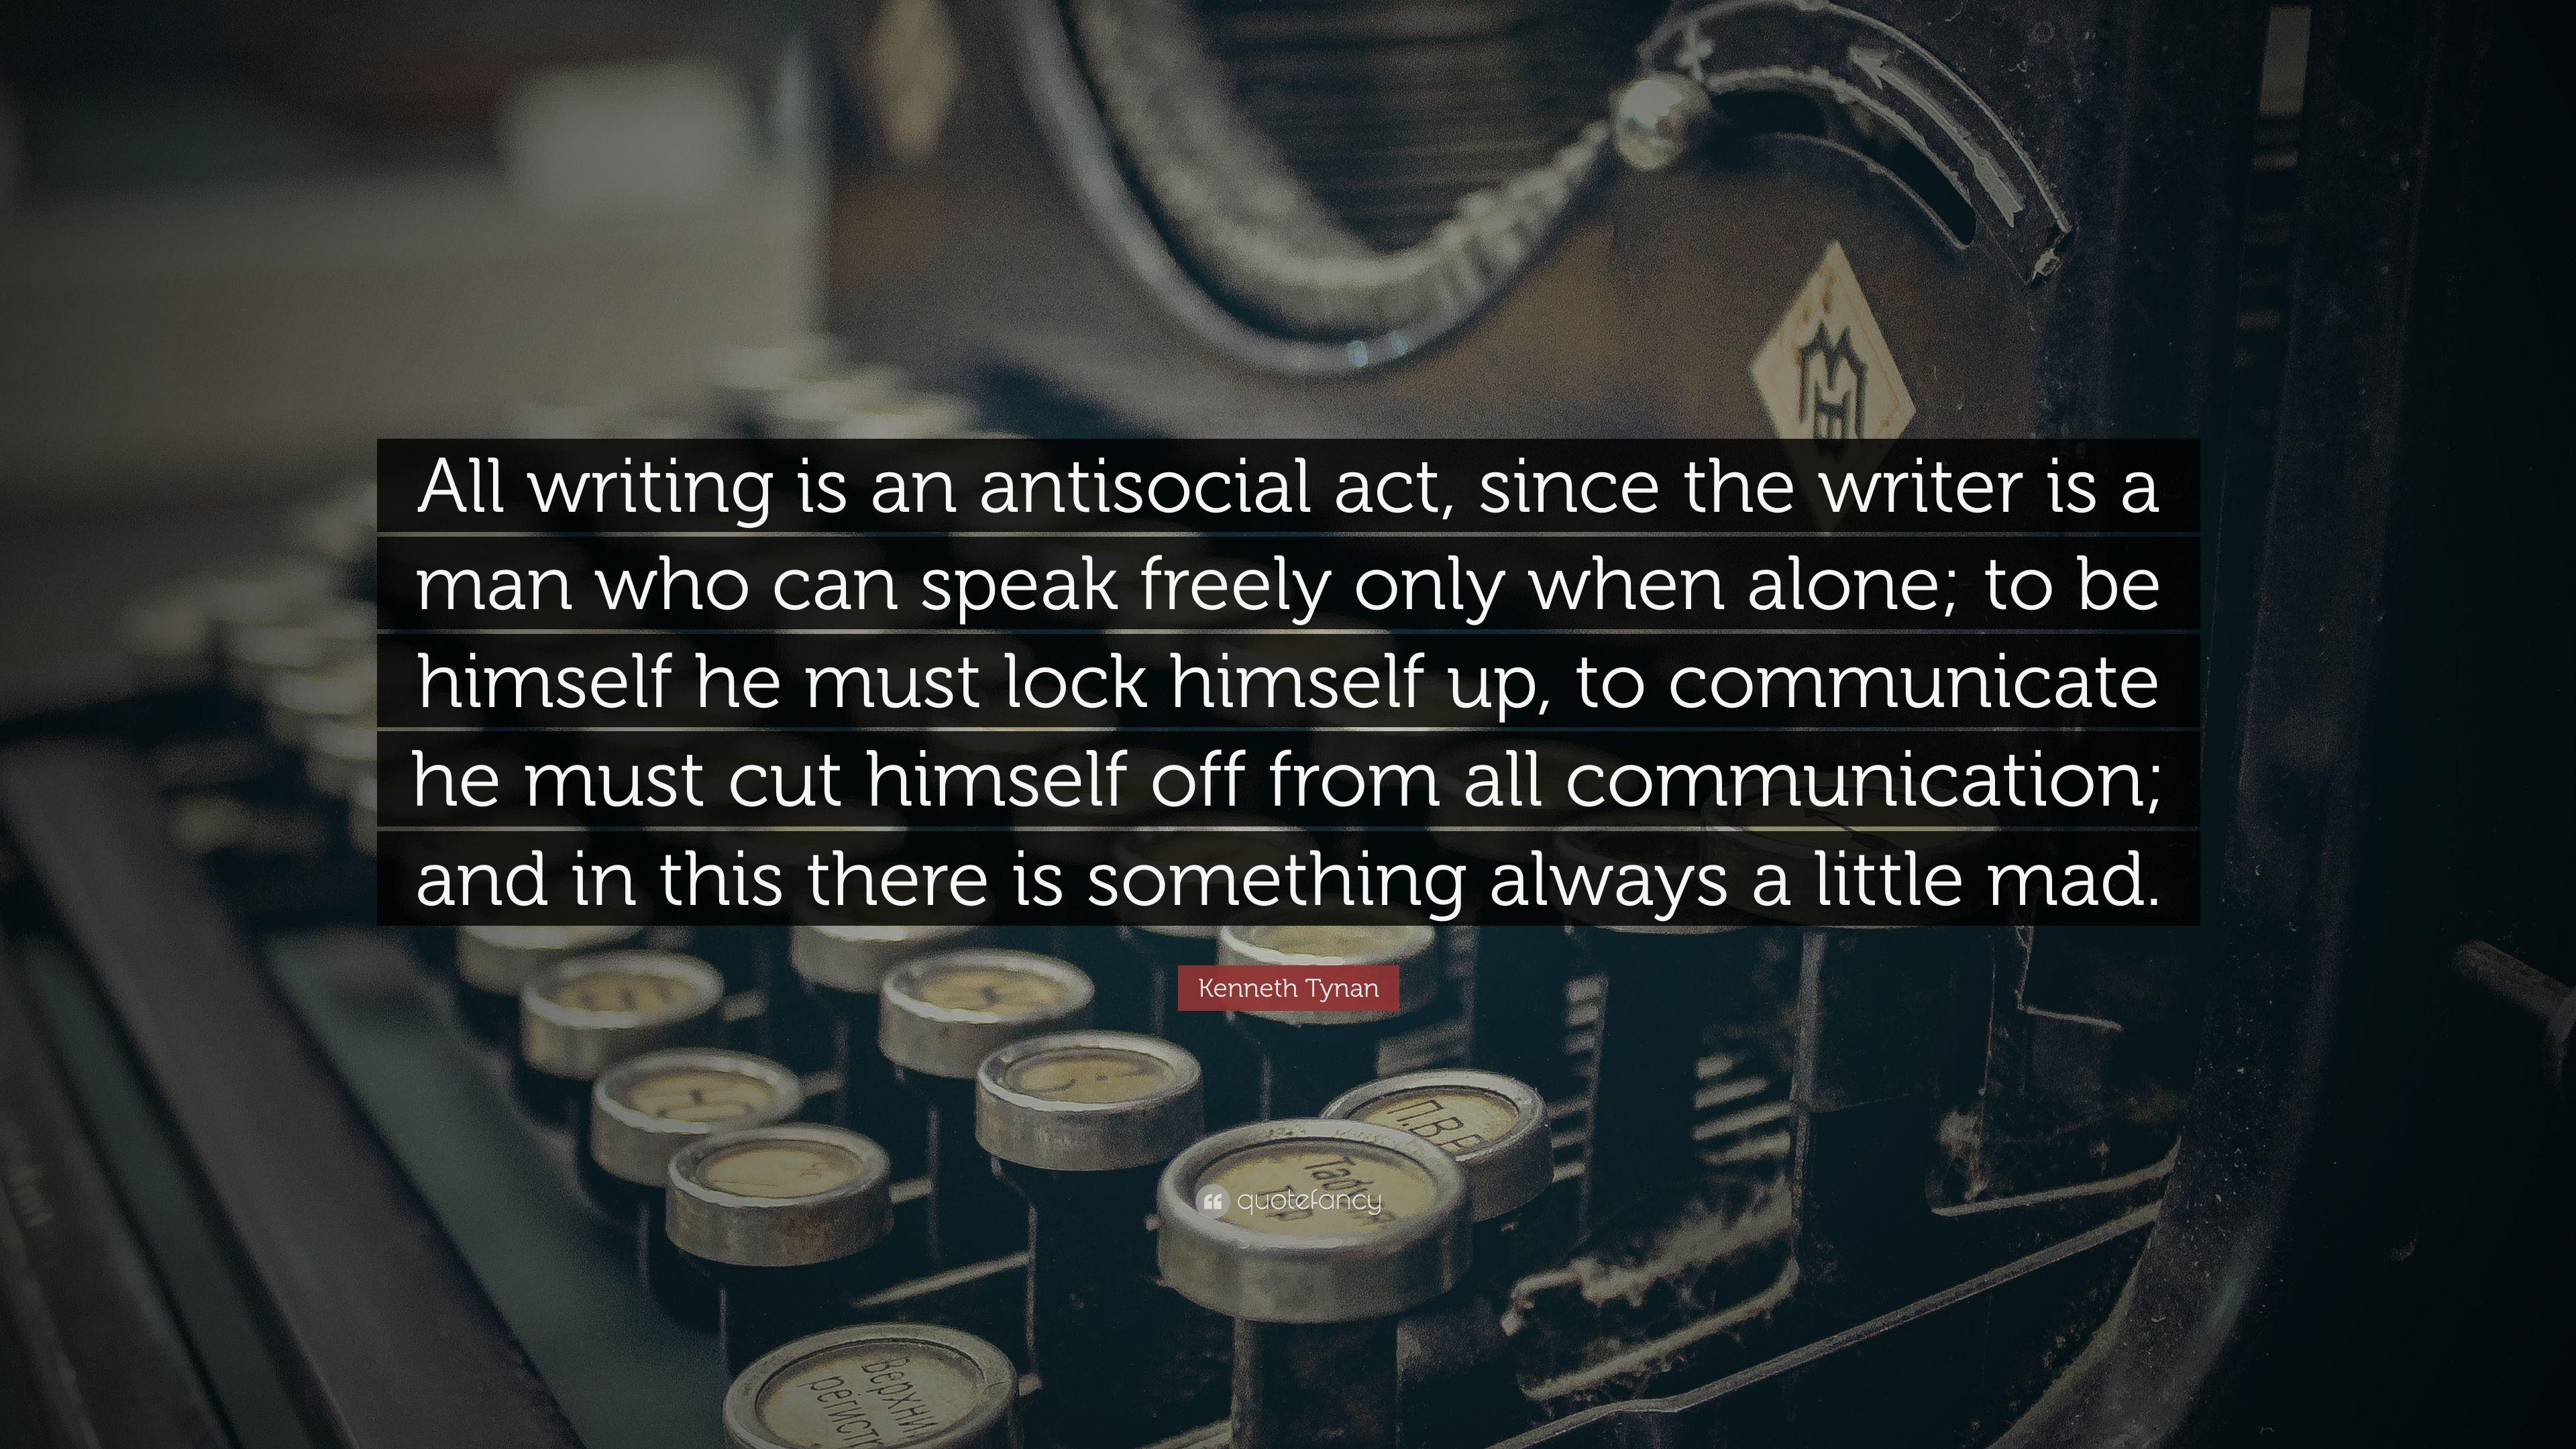 Kenneth Tynan Quote: “All writing is an antisocial act, since